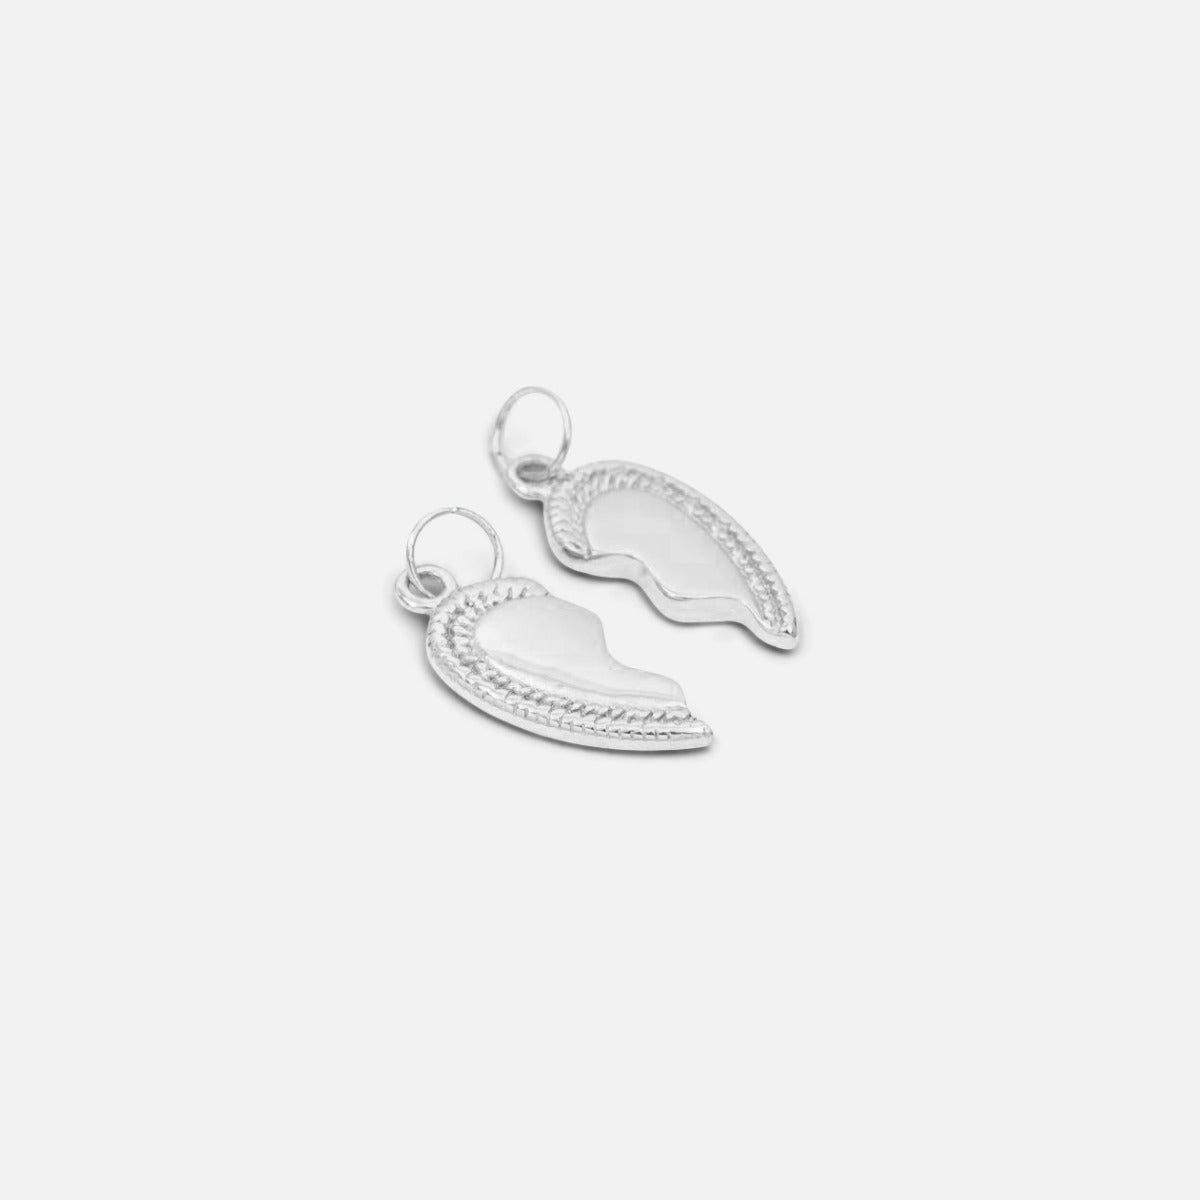 Small silver best friend charms